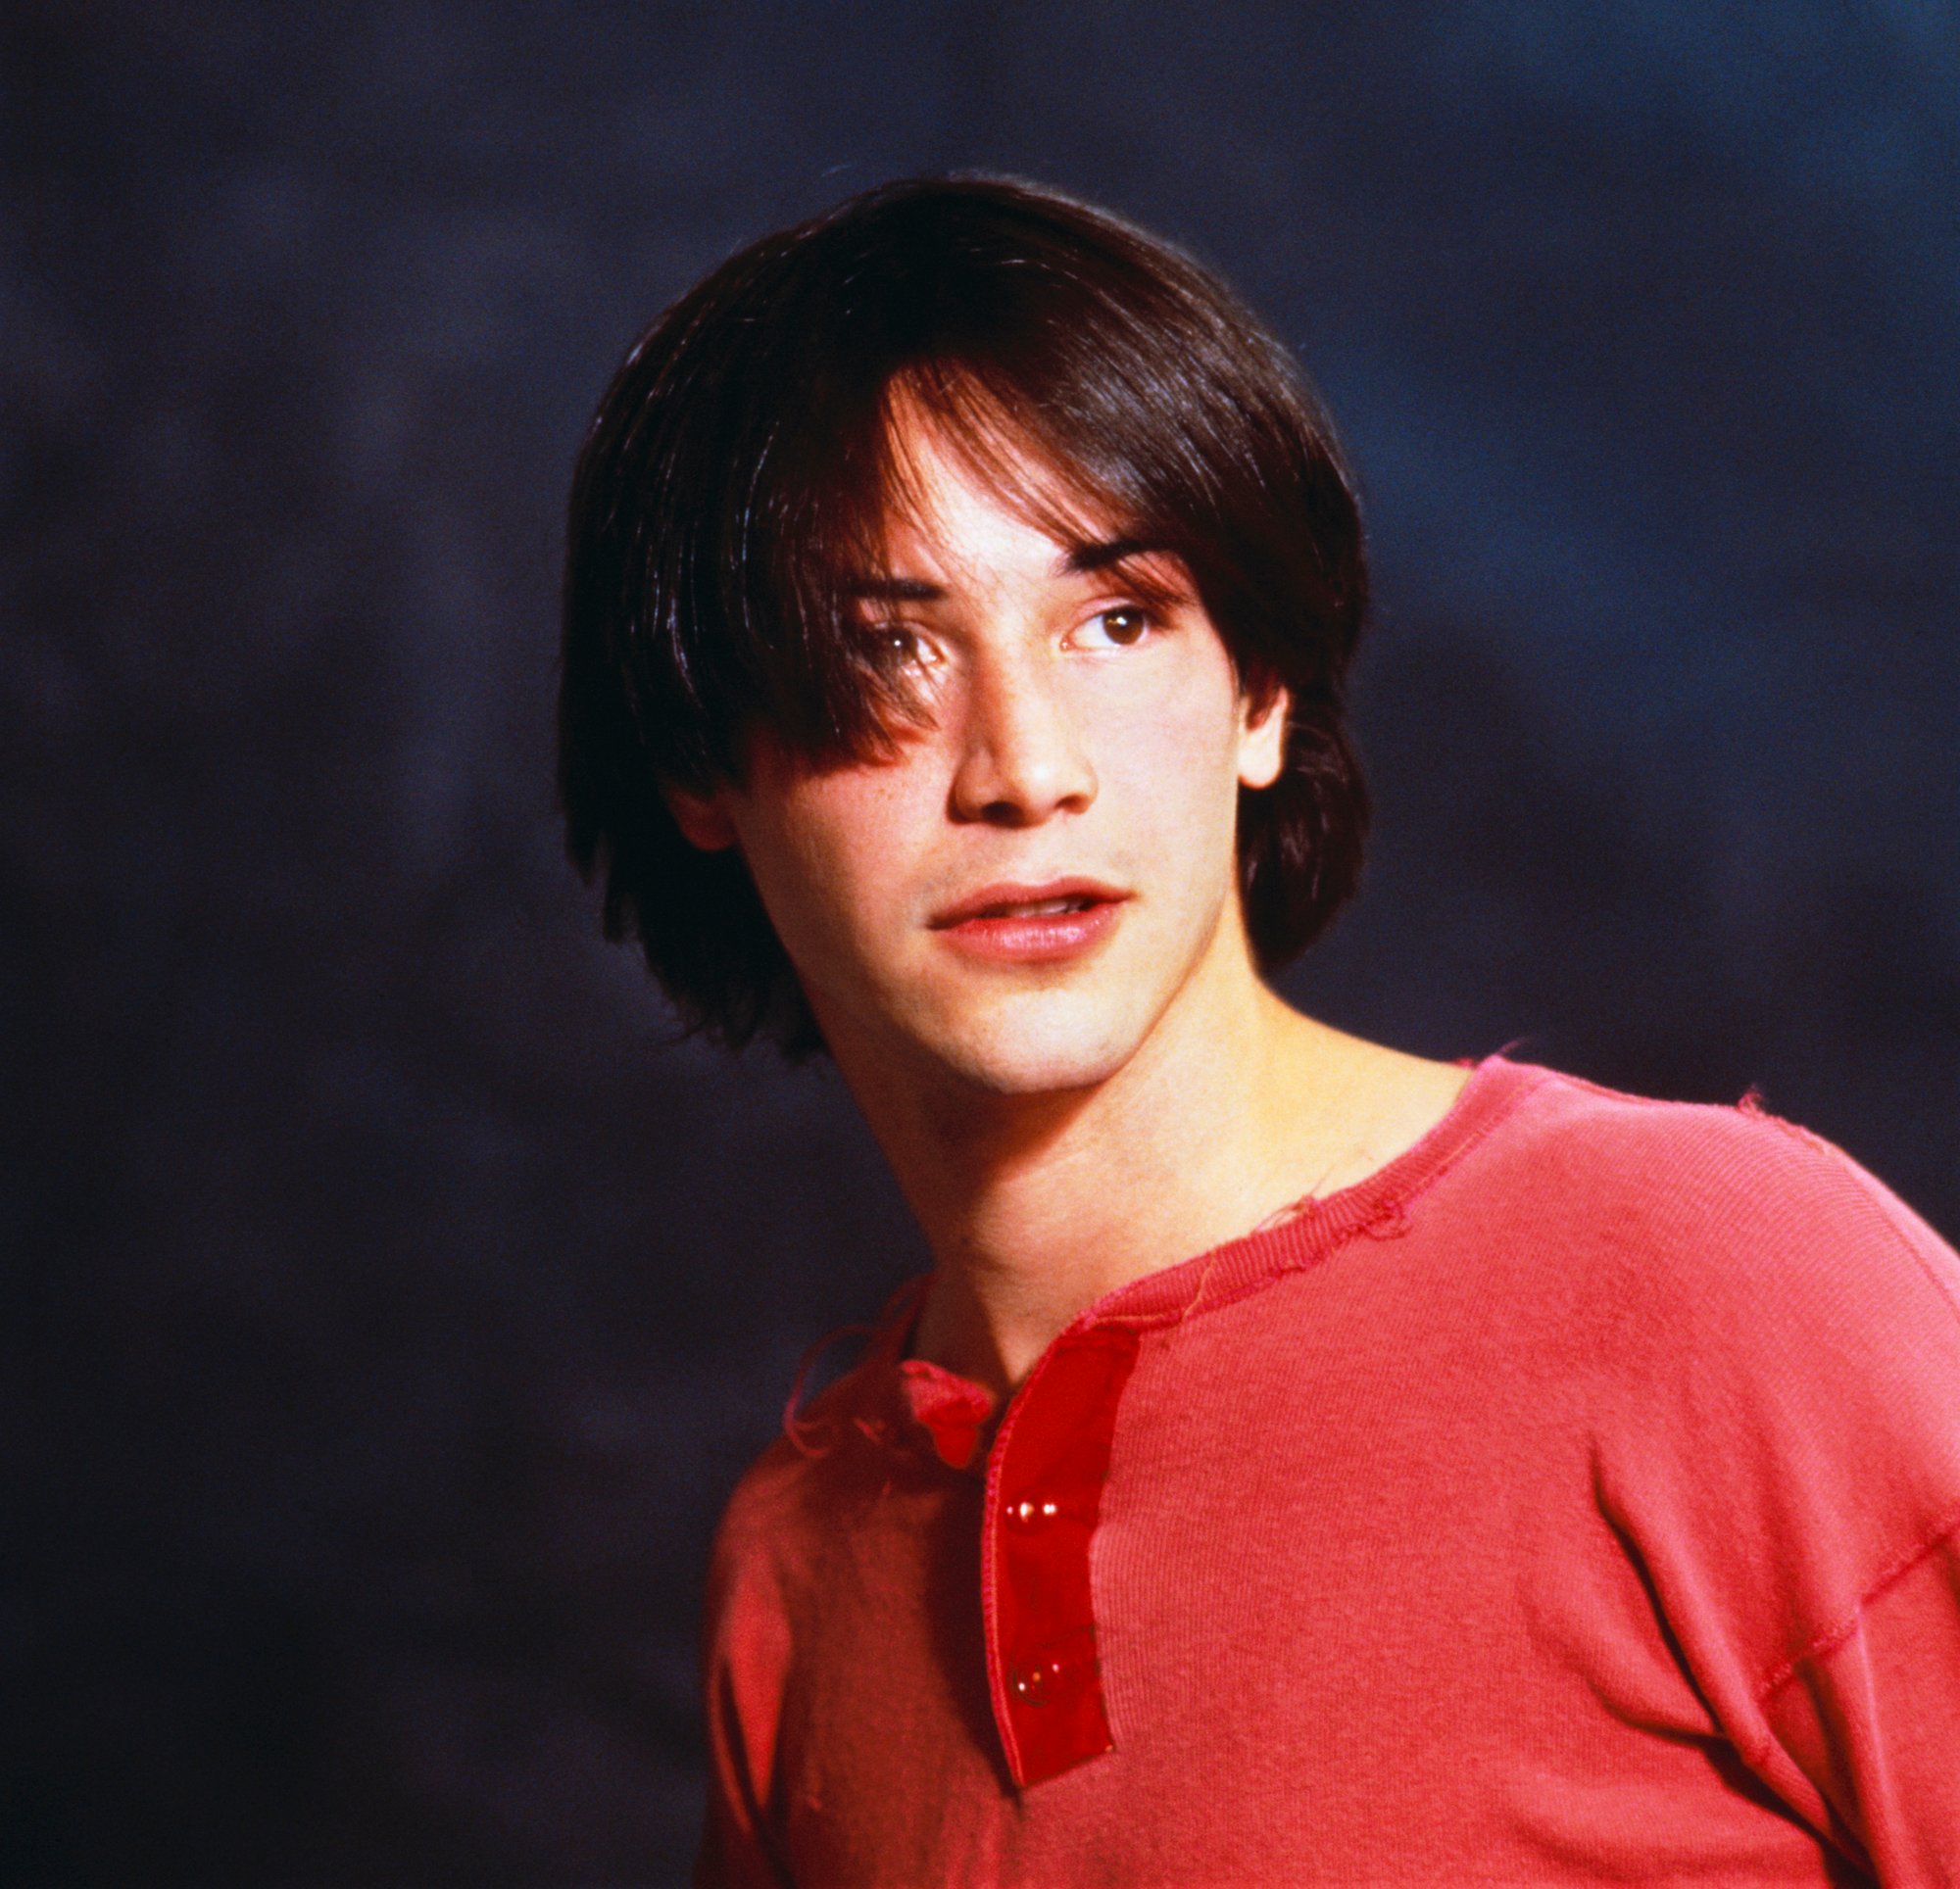 A young Keanu Reeves, with a wispy bowl haircut and a red henley shirt, poses in a photo studio